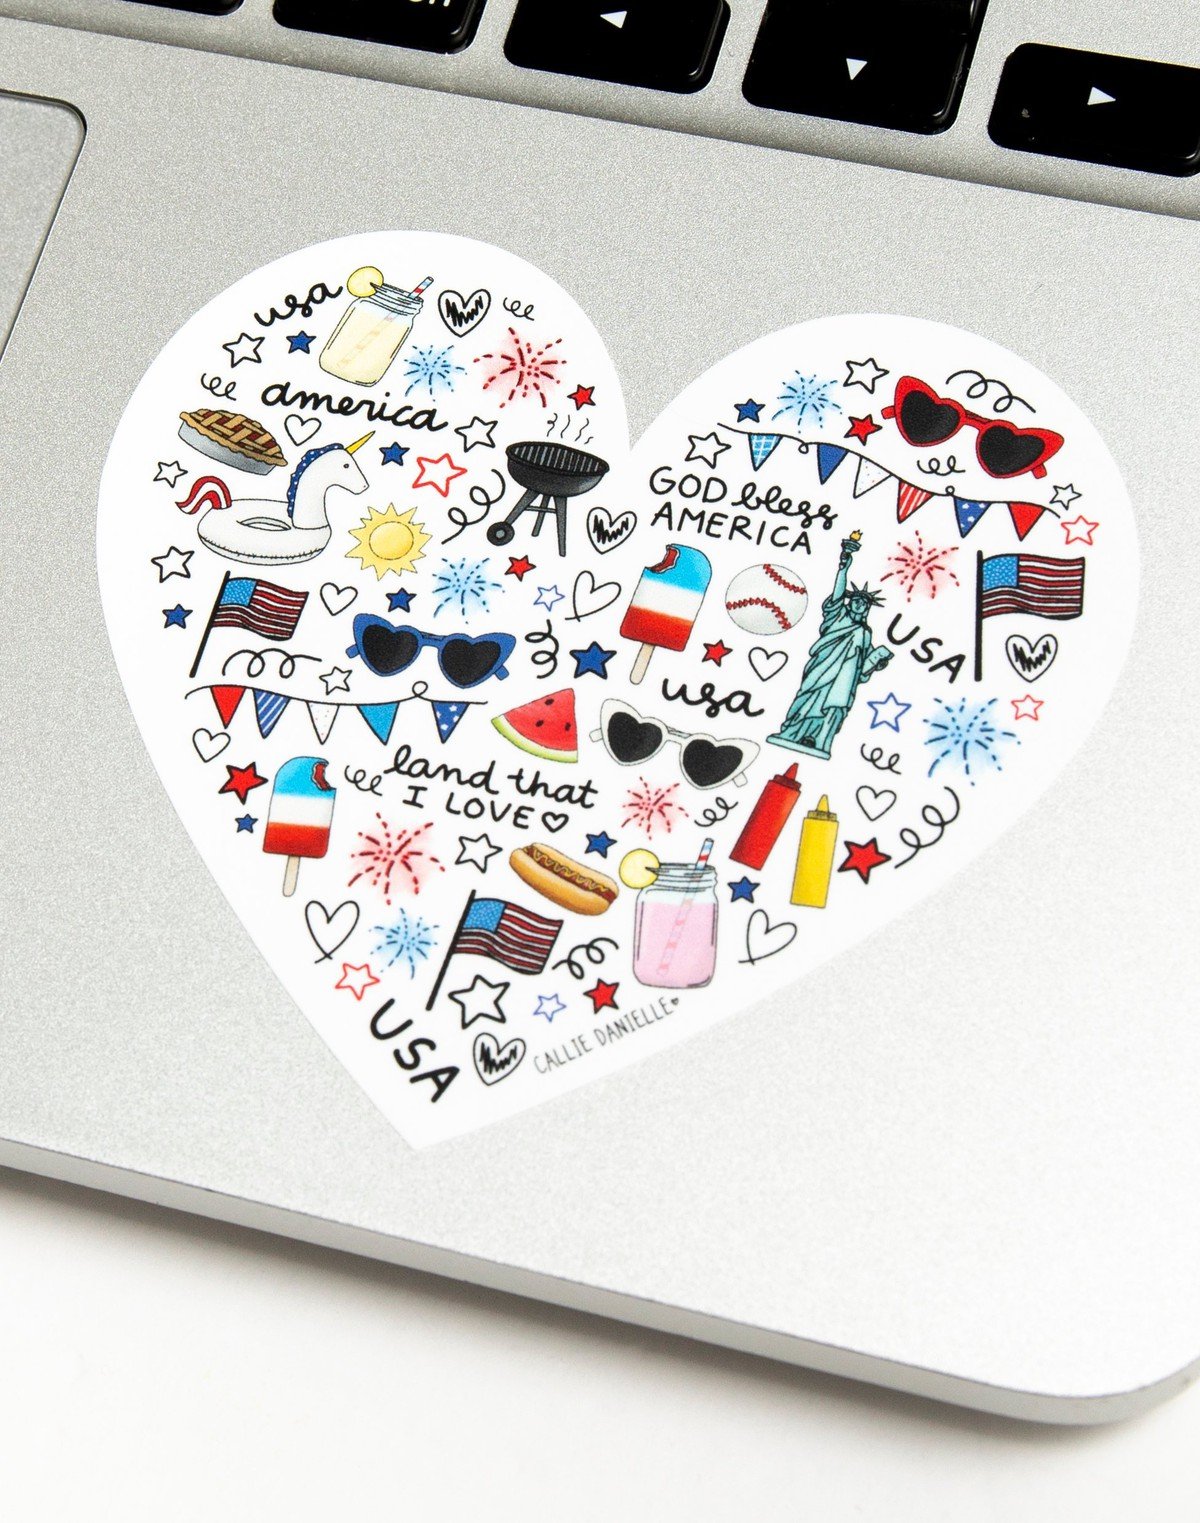 Love for USA Decal Sticker item